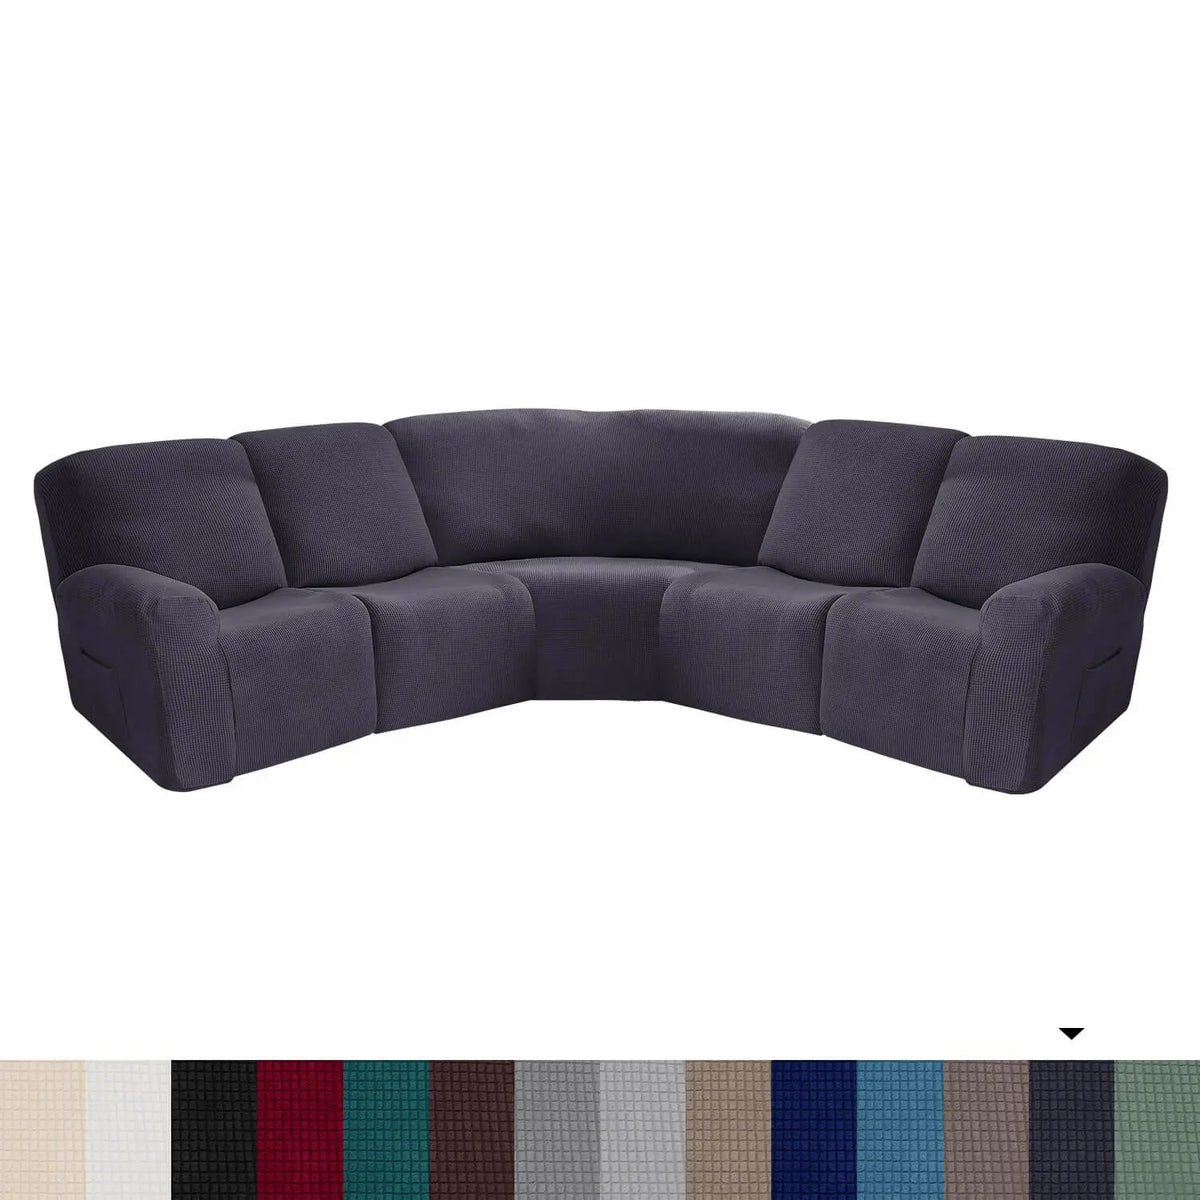 Crfatop L Shape Sectional Recliner Sofa Covers Corner Couch Covers Dark-Grey